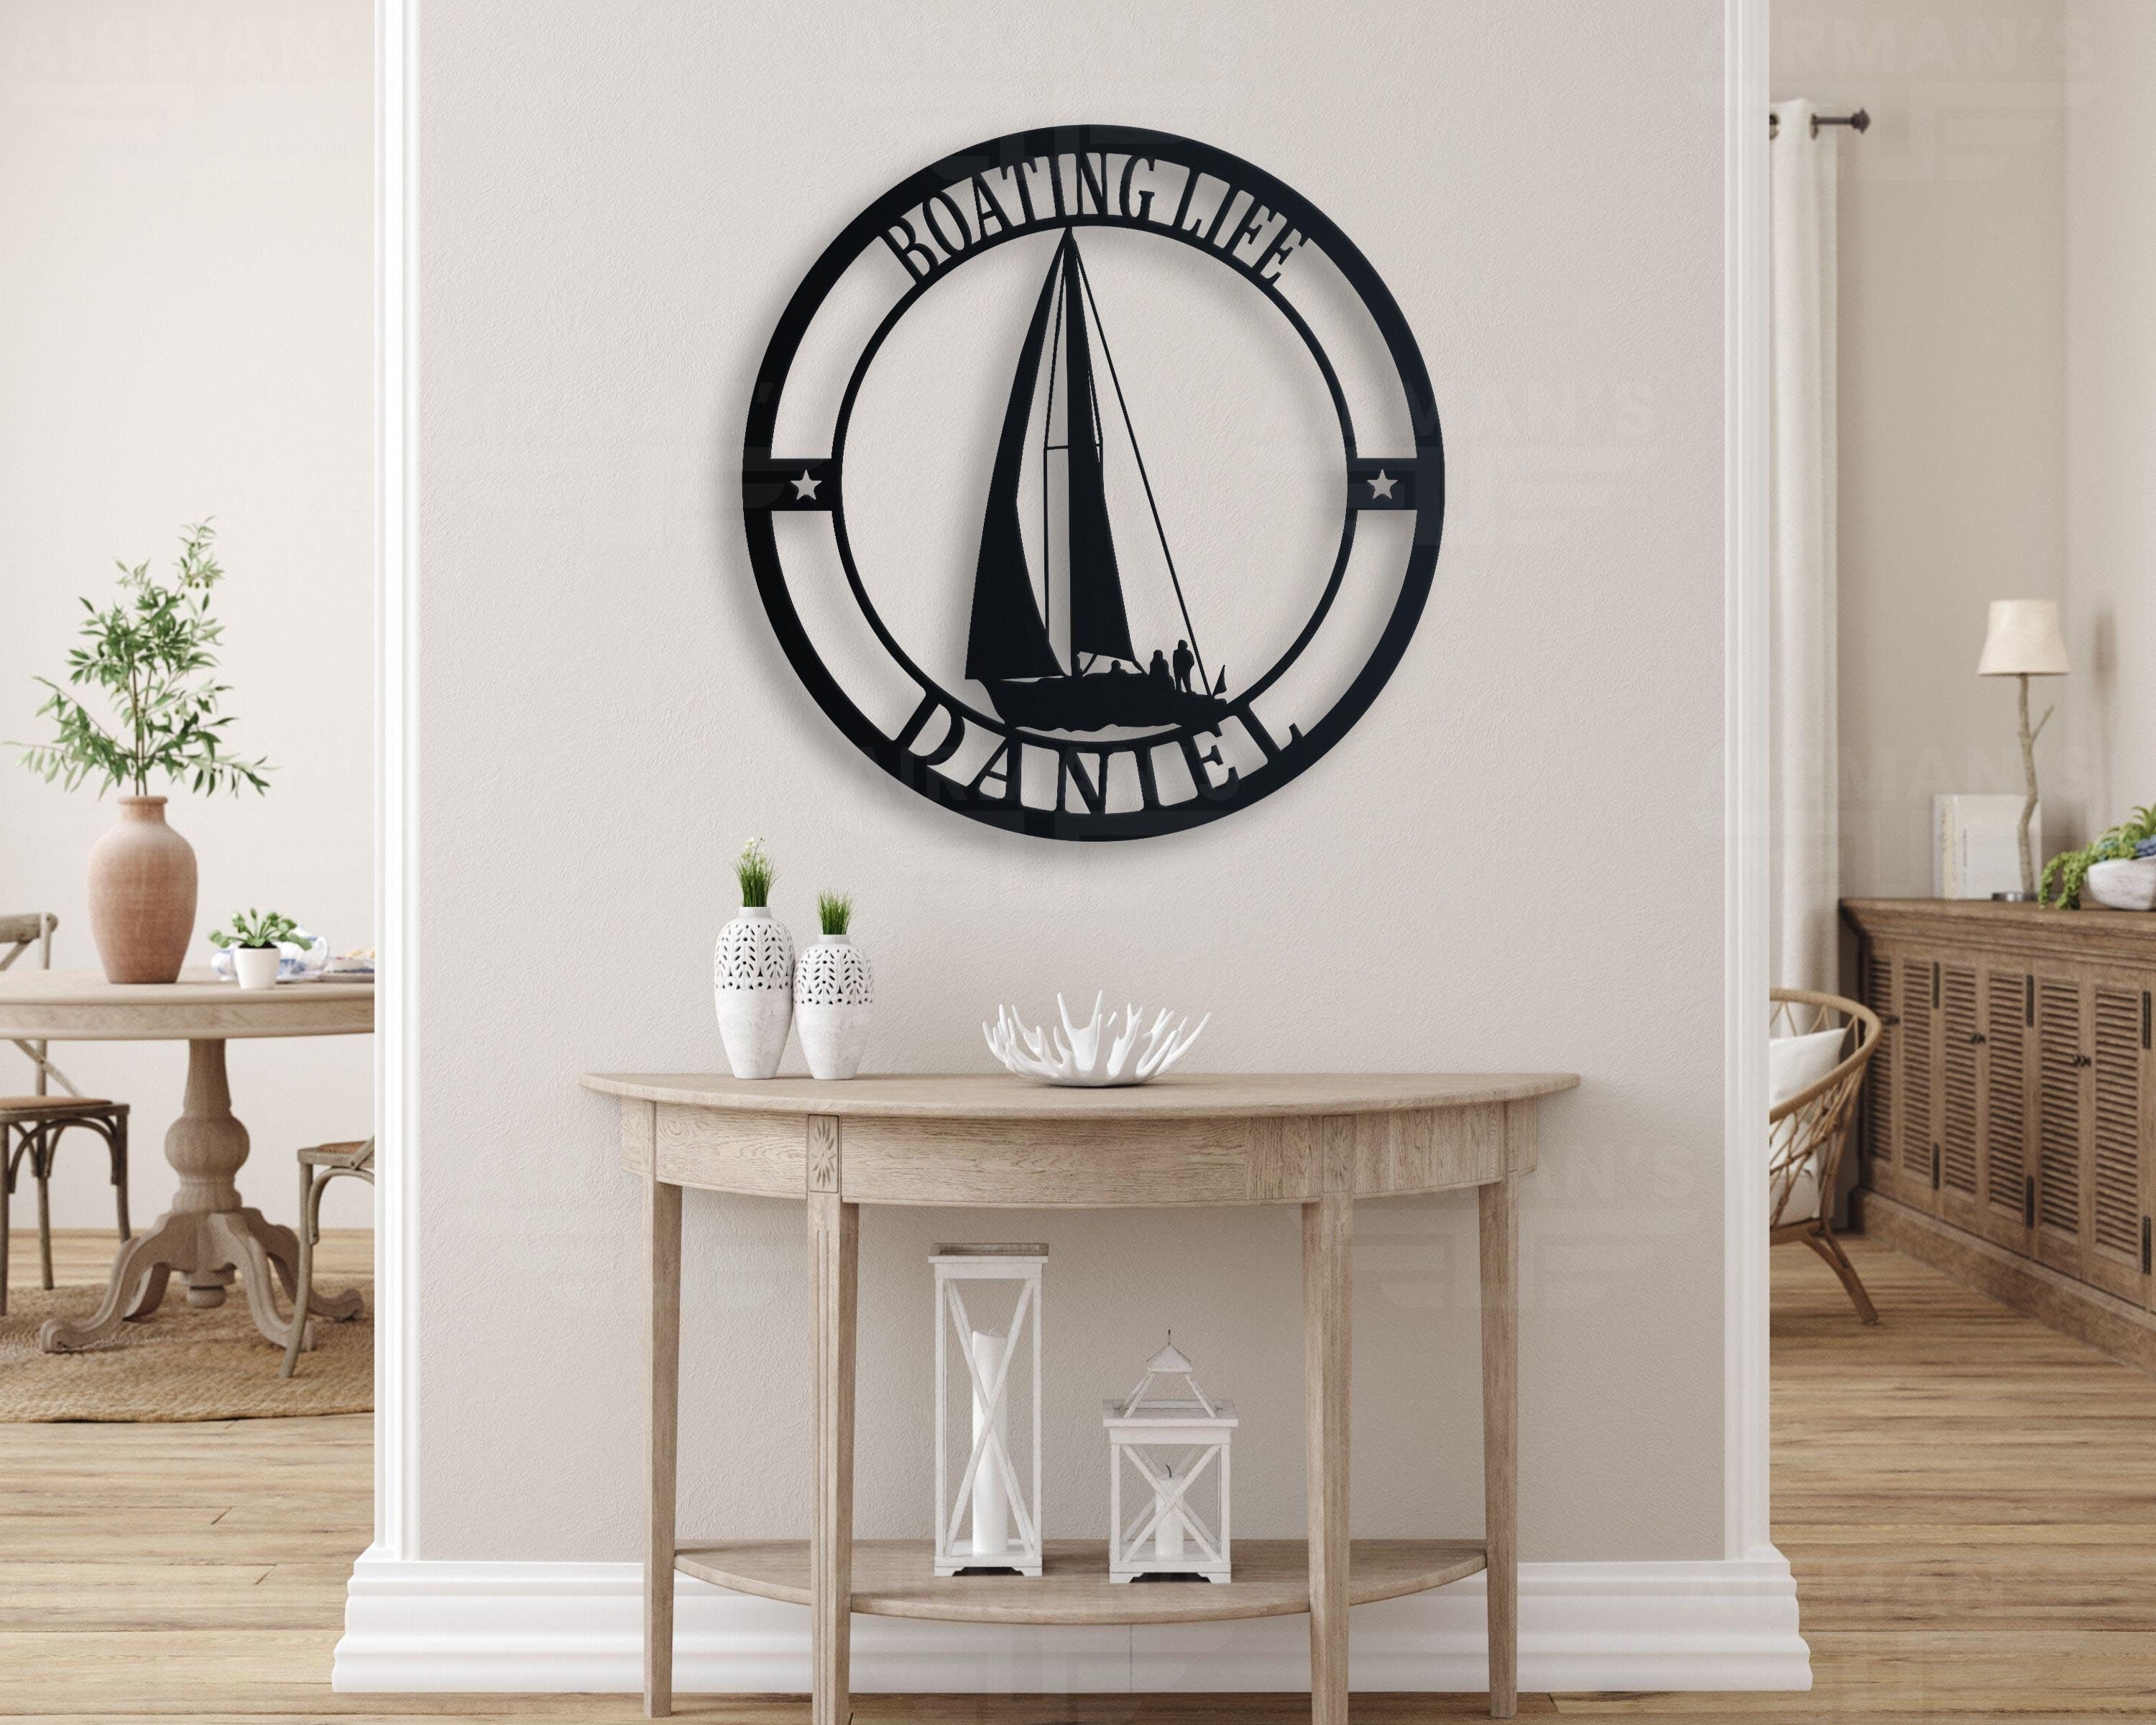 Personalized Sailing LED Sign, Boat Captain Metal Wall Art, Neon Sailboat Decor, Captain's Christmas Ornament Gift